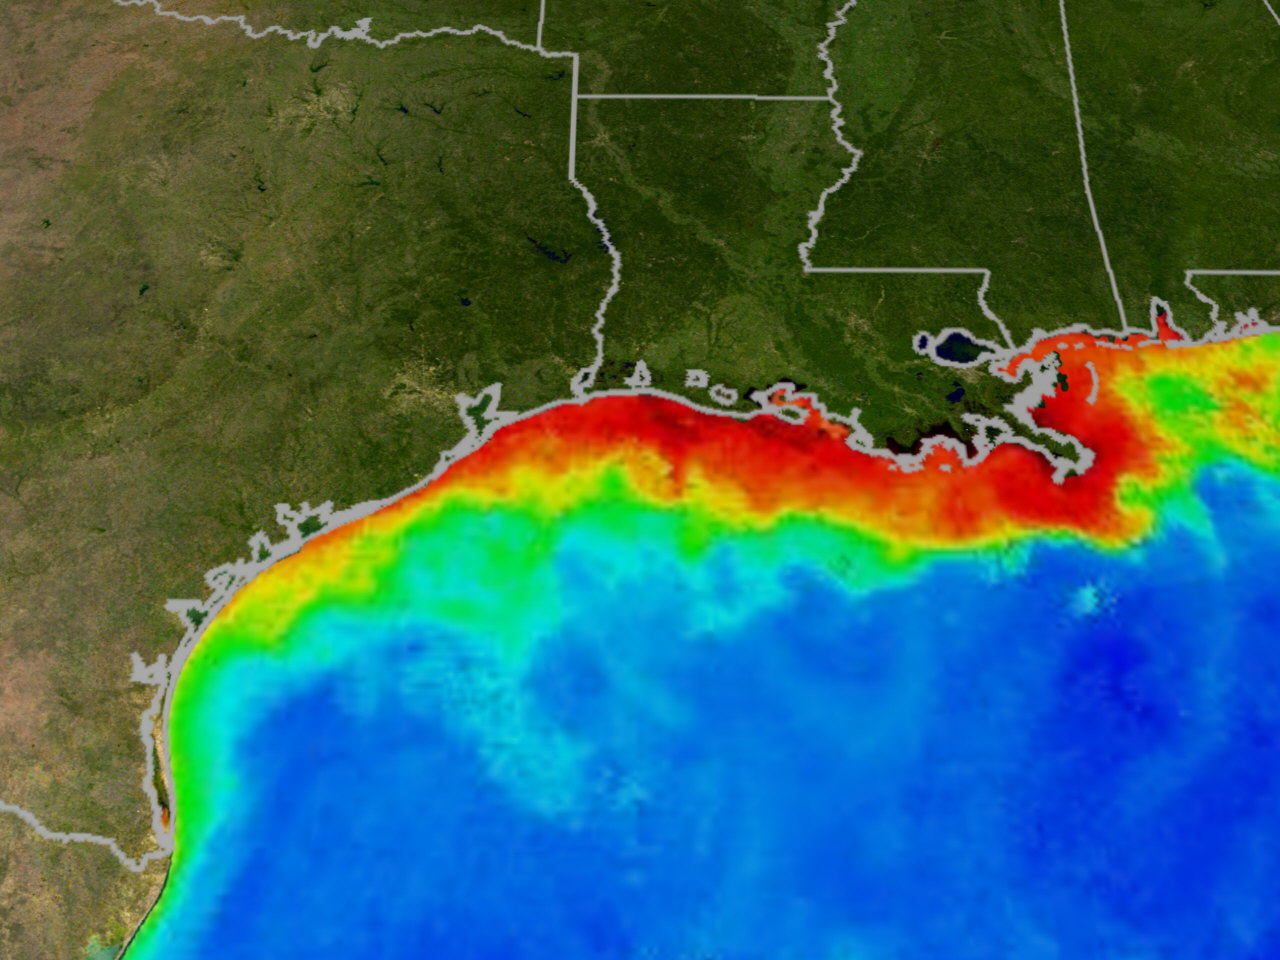 Image: Gulf of Mexico DEAD ZONE caused by agricultural runoff from U.S. farms